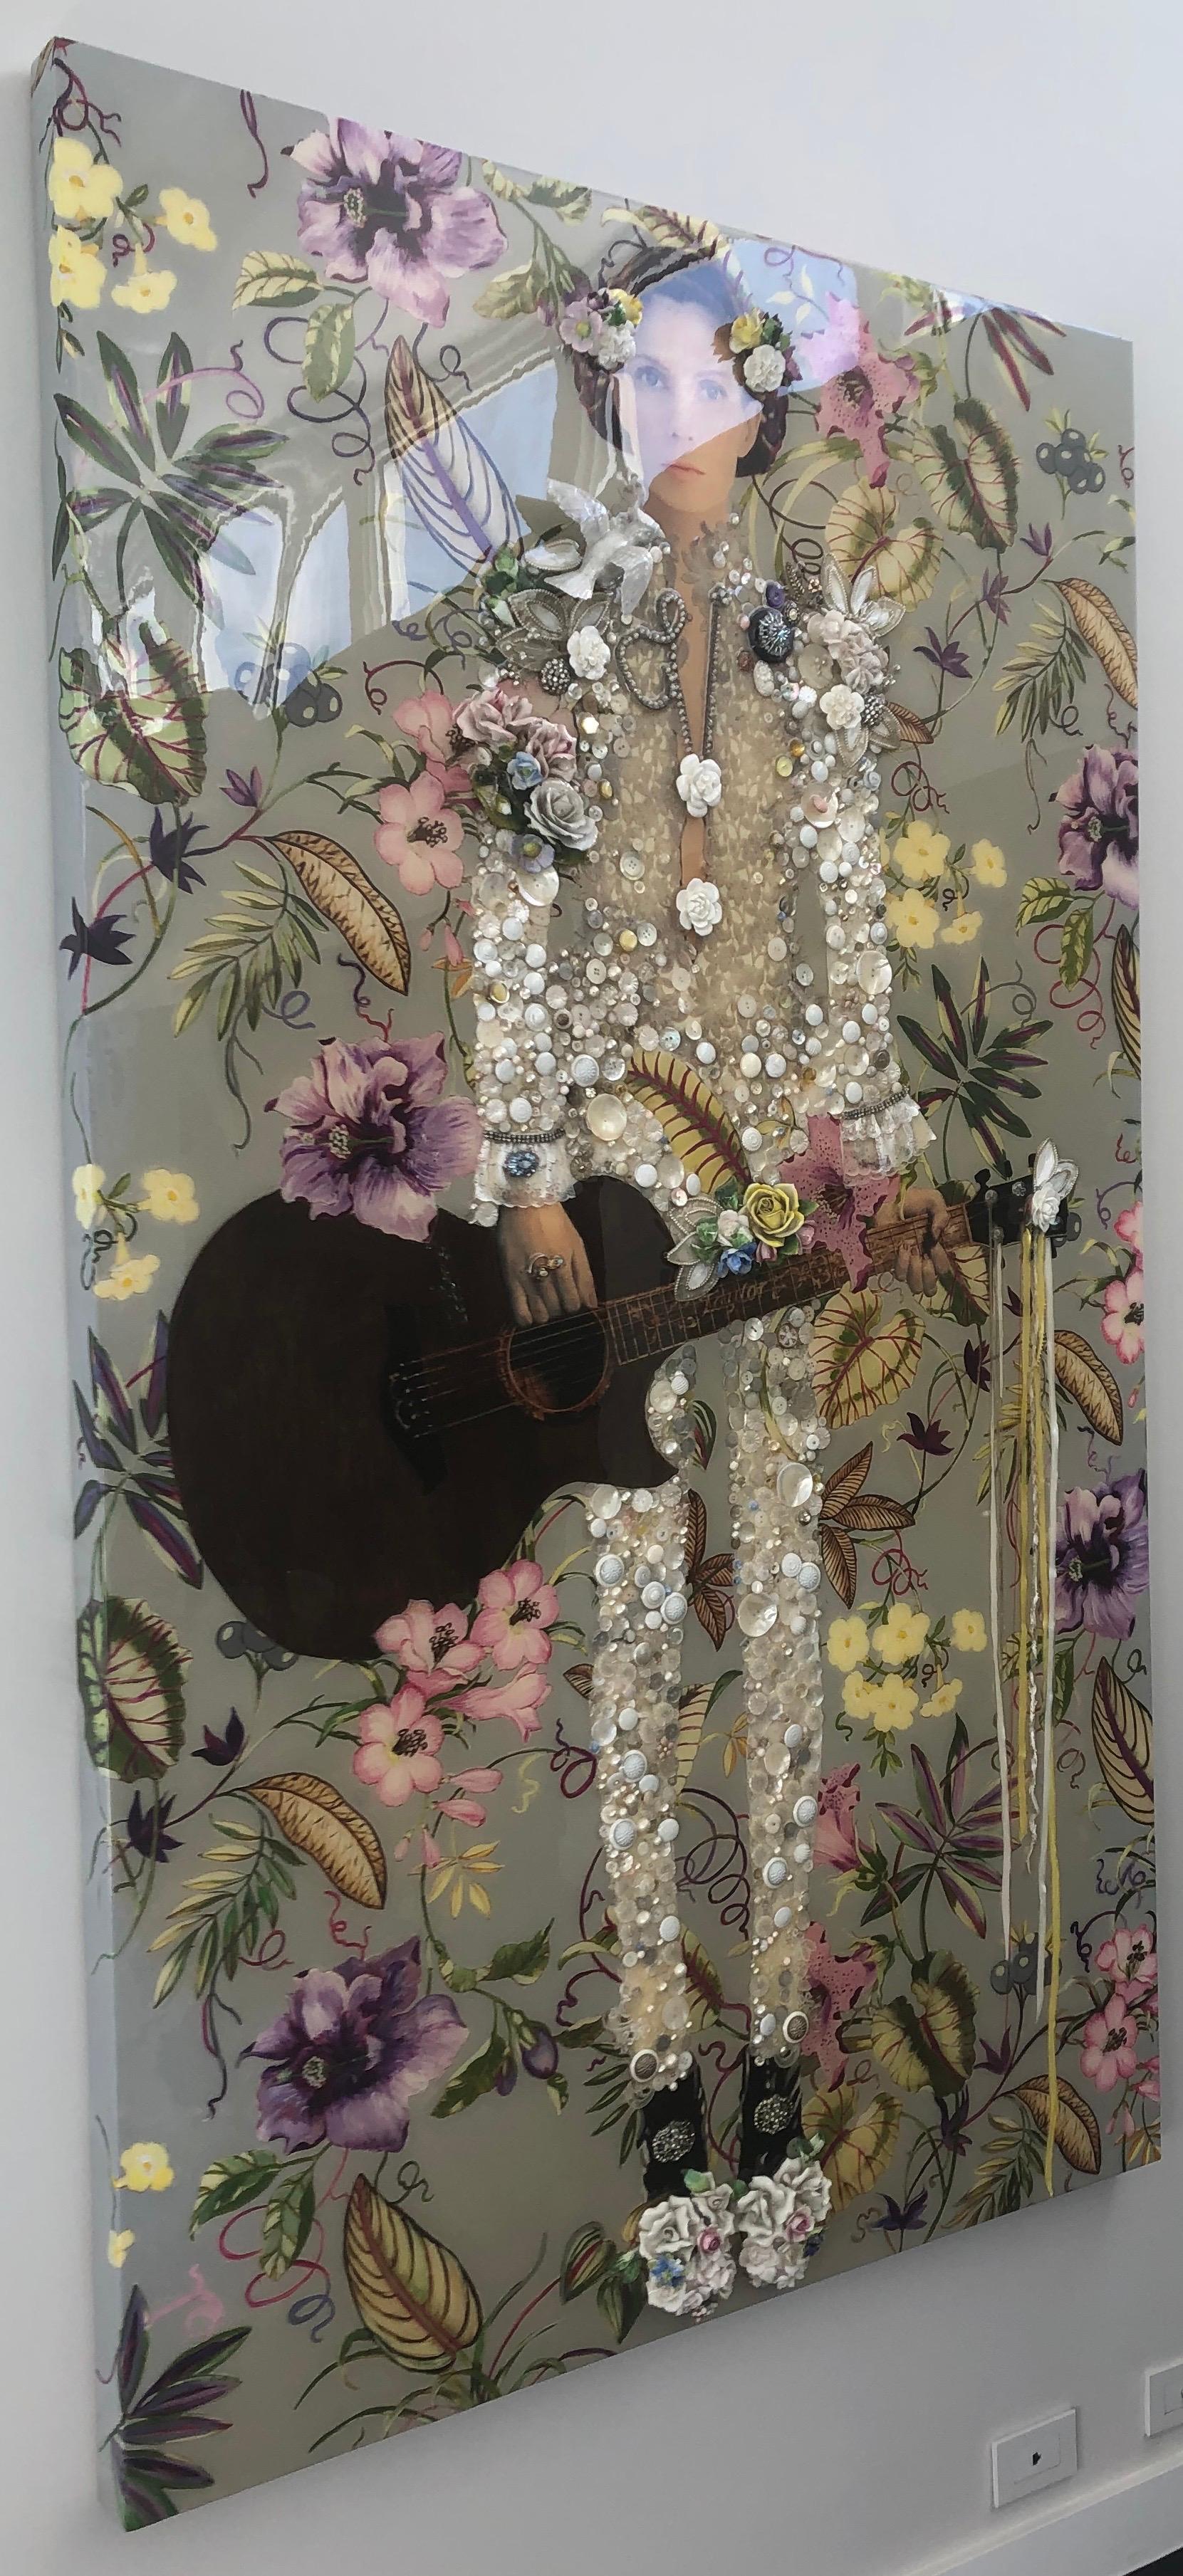 Fascinating textural large scale work featuring a life-size portrait of a woman with guitar. A mixed-media work in tones of grey, violet, and yellow. This piece is comprised of photographs, lace, pearls, buttons, chinaware, porcelain, jewelry,